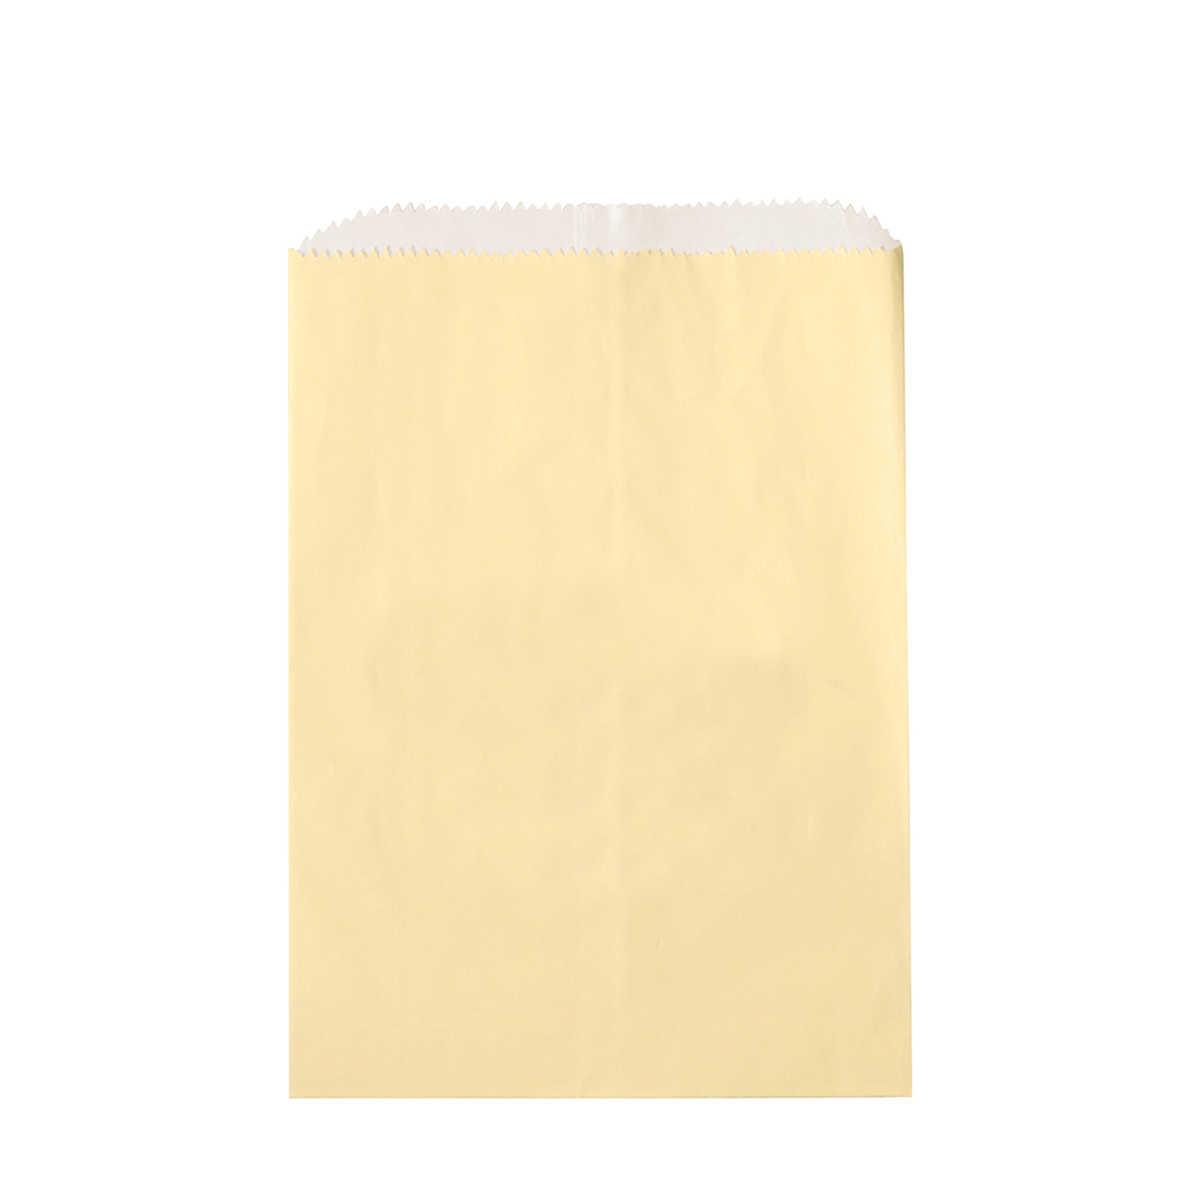 Cream Glassine Lined 0.5# Paper Cookie, Candy And Nut Bag